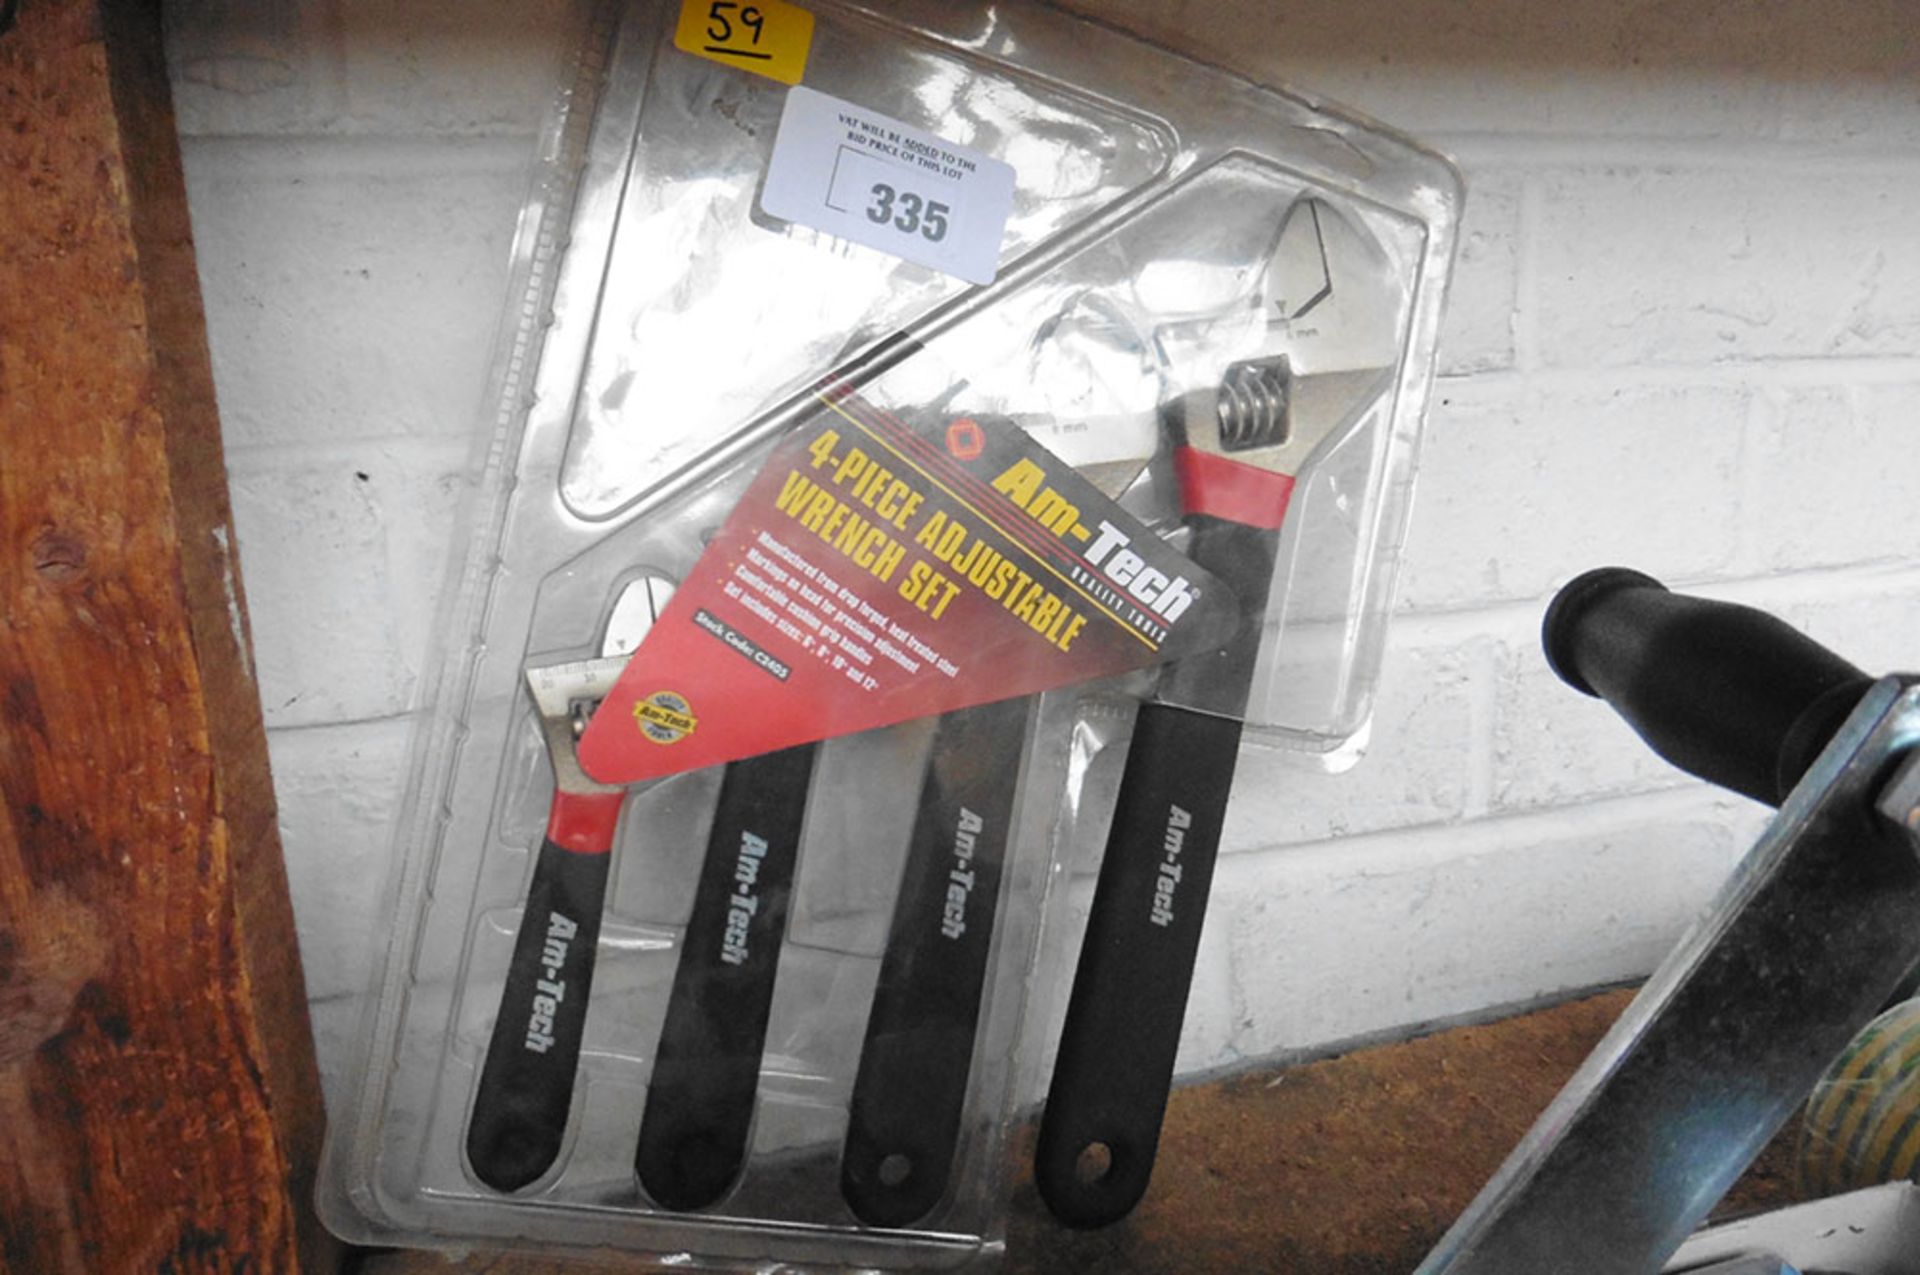 4 Adjustable wrenches (59)